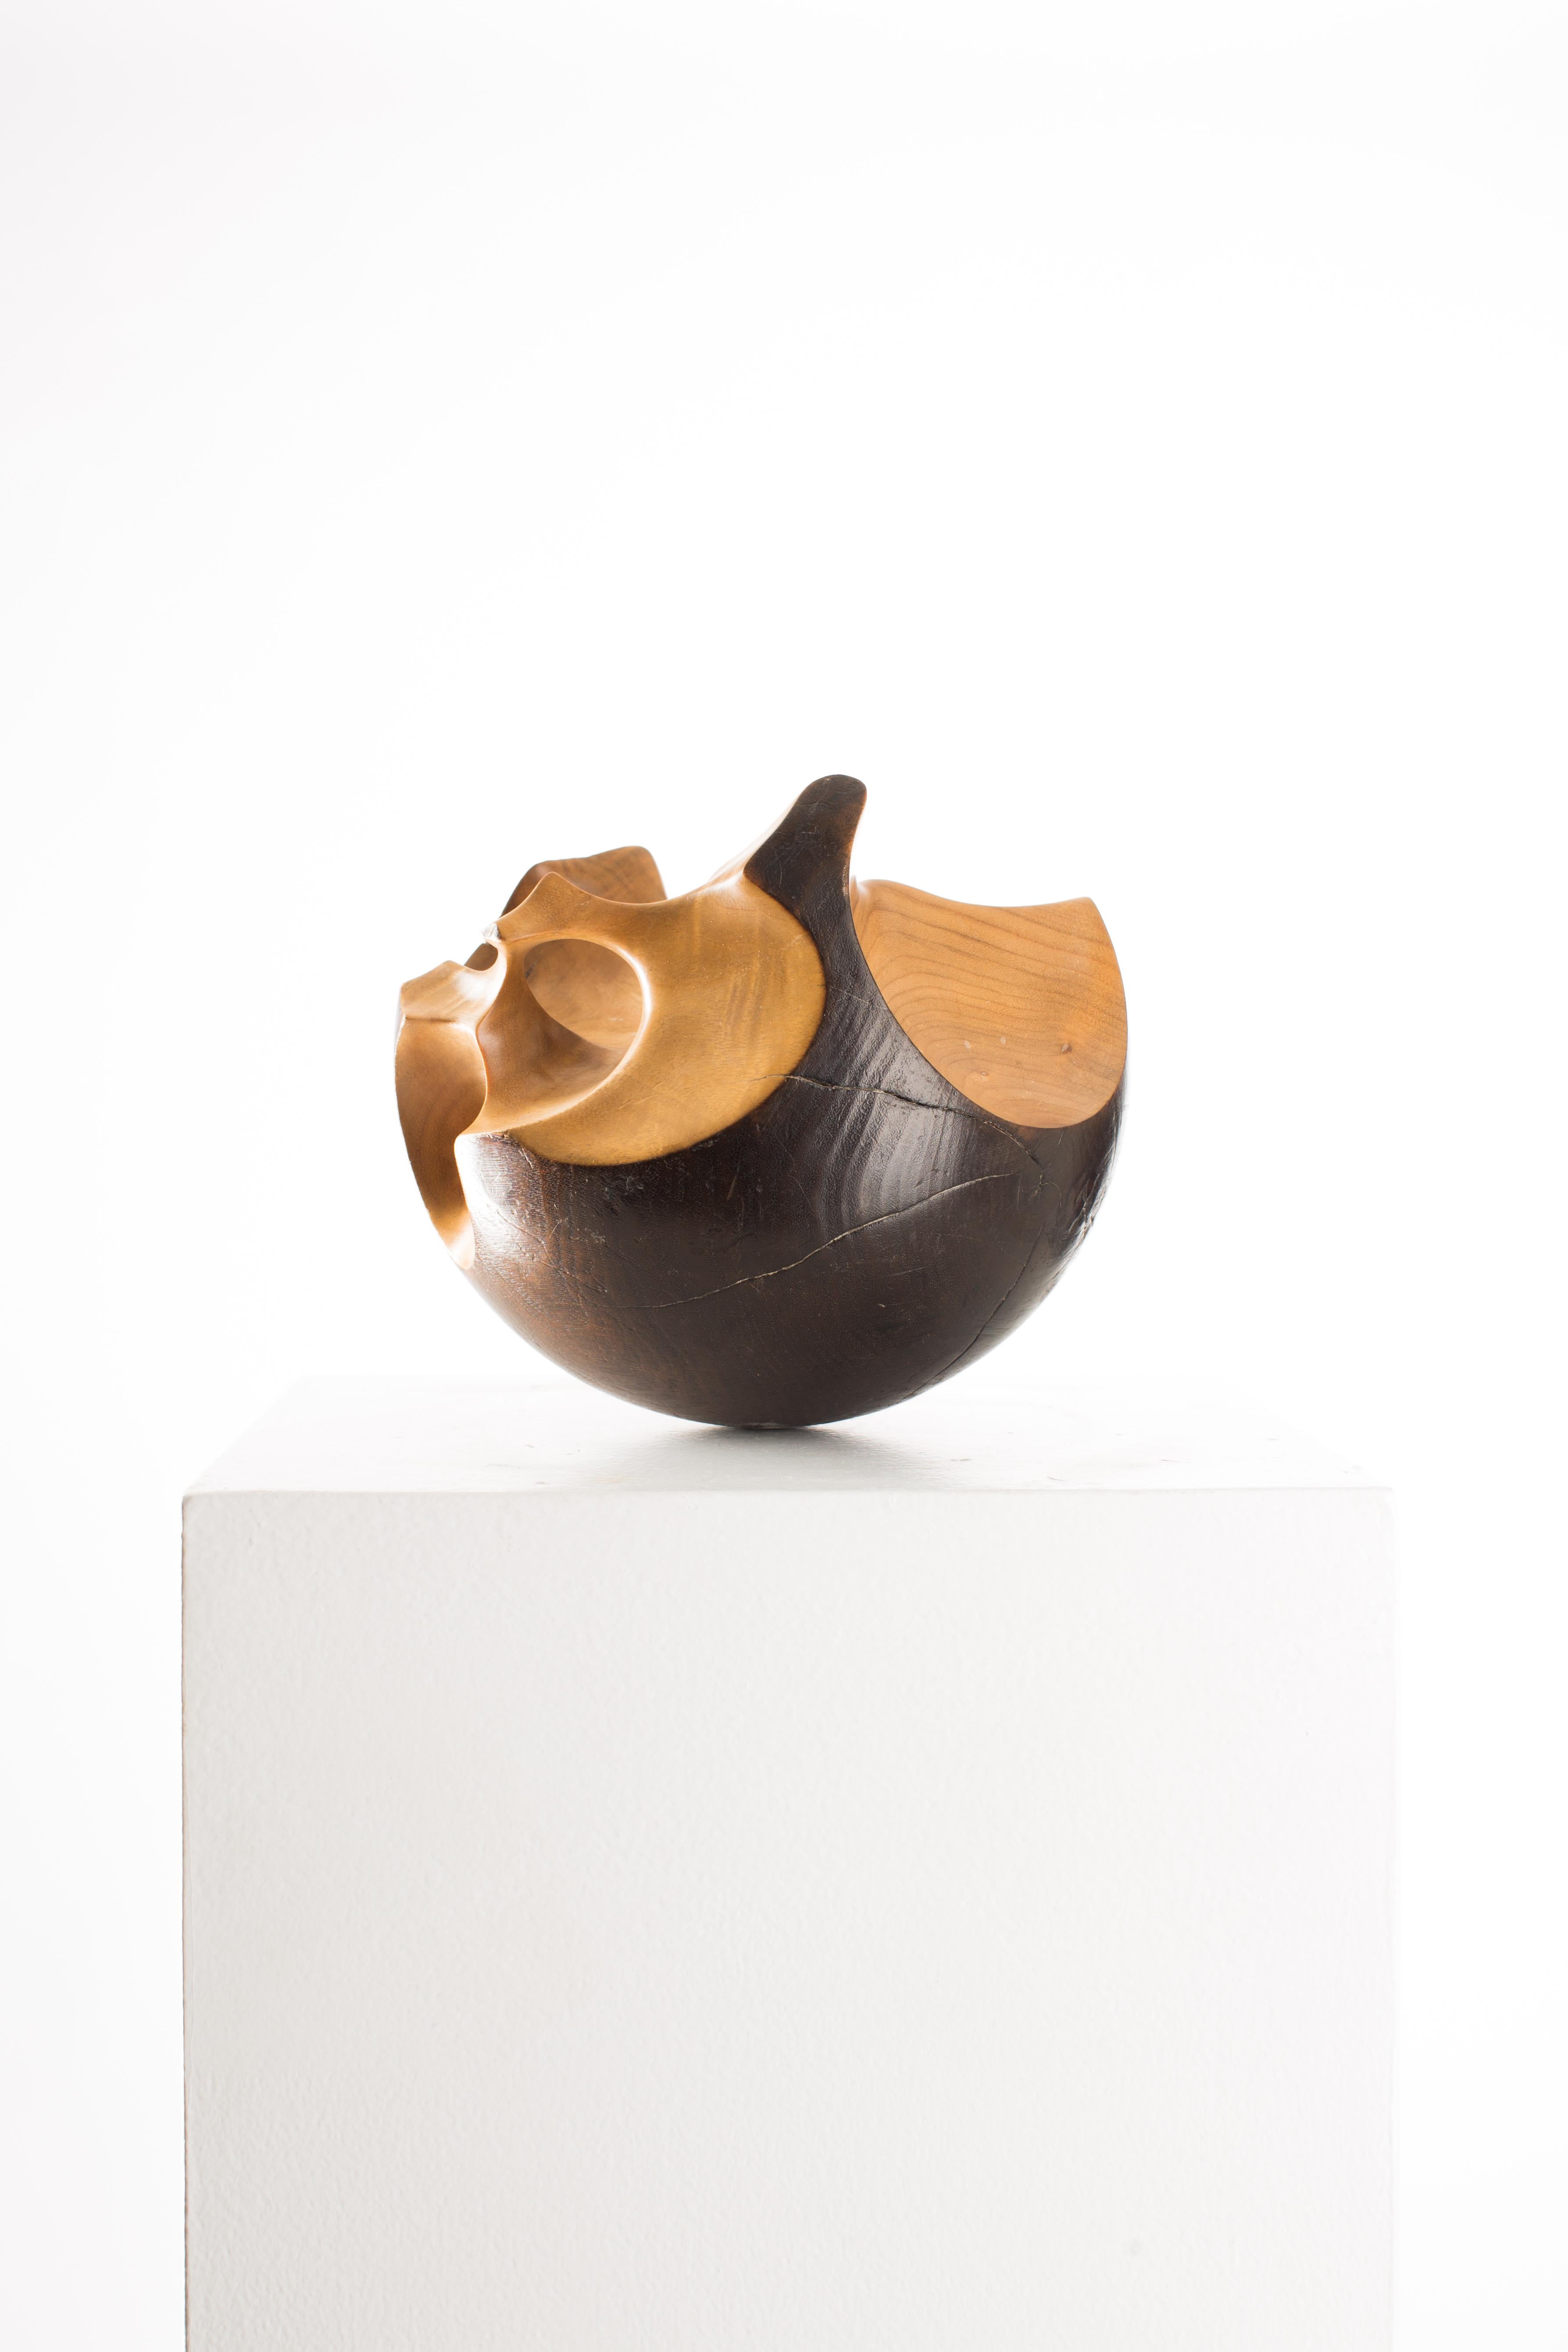 Black, Raw, Satin, Wood, Abstract, Contemporary, Modern, Sculpture